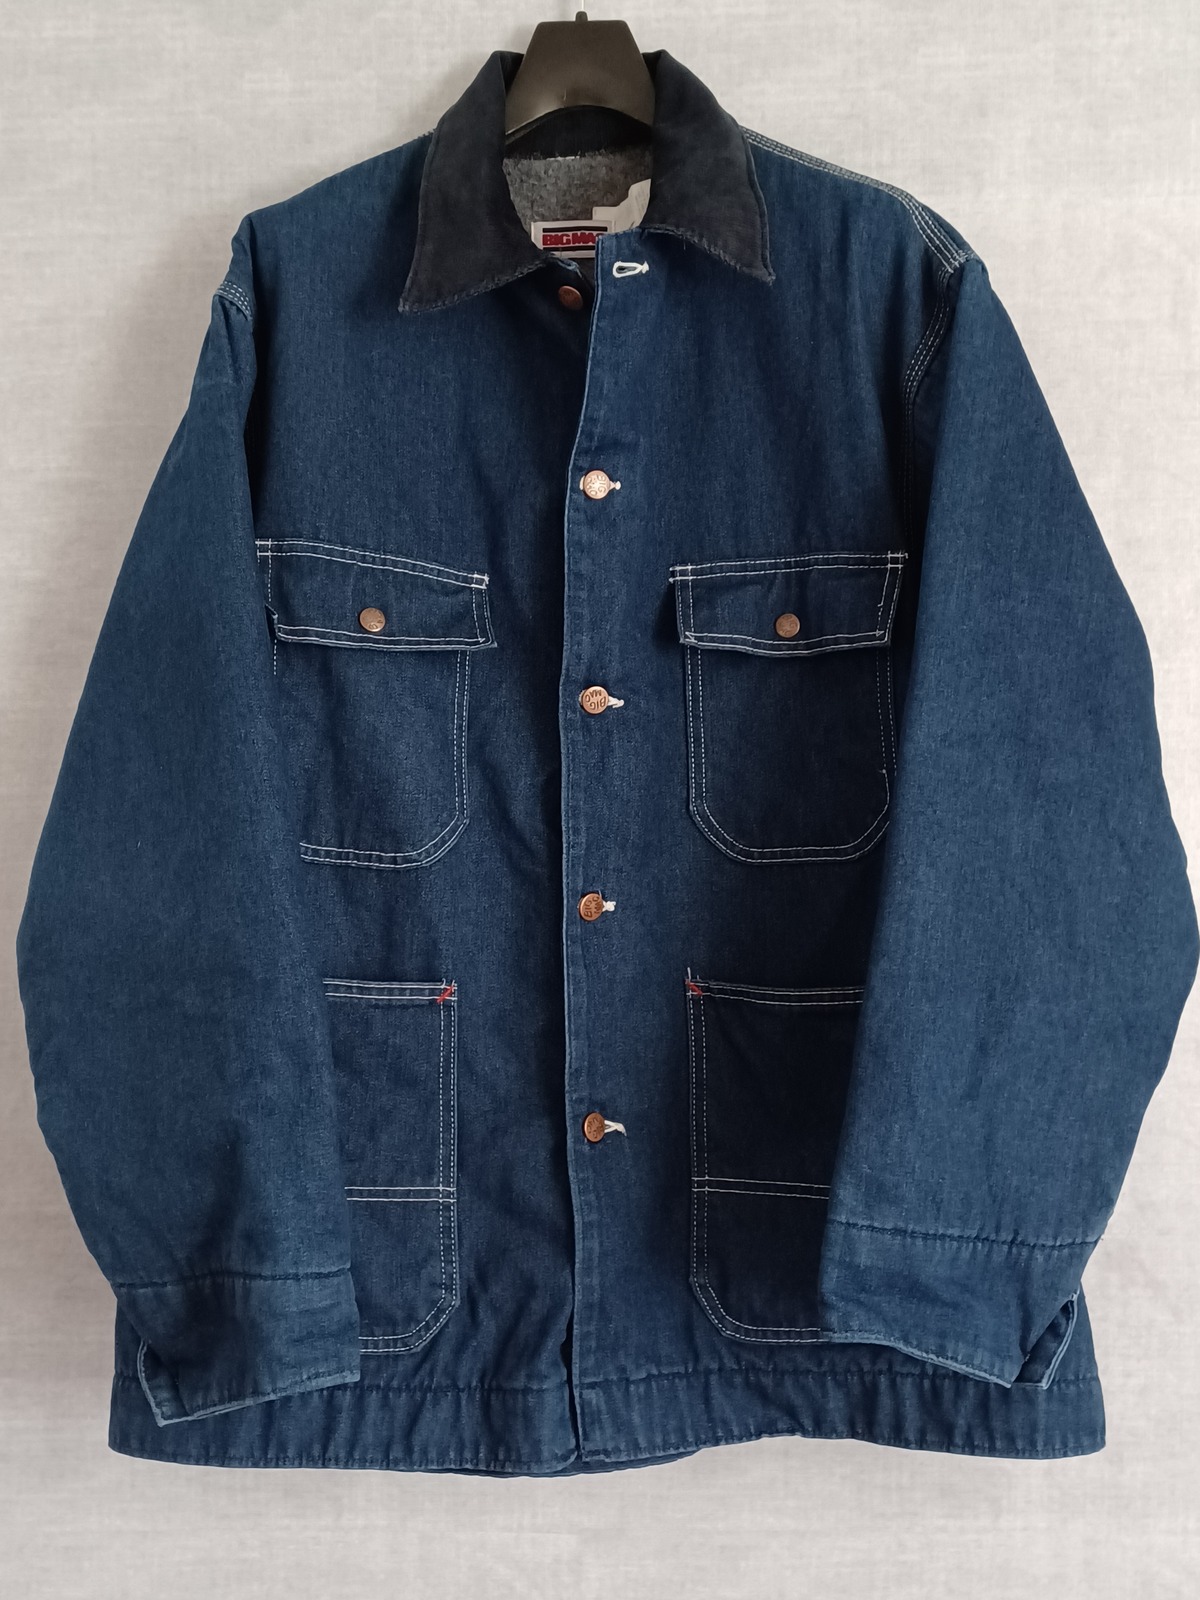 used wear_80s BIGMAC DENIM COVERALL JACKET | theejourneyoflife